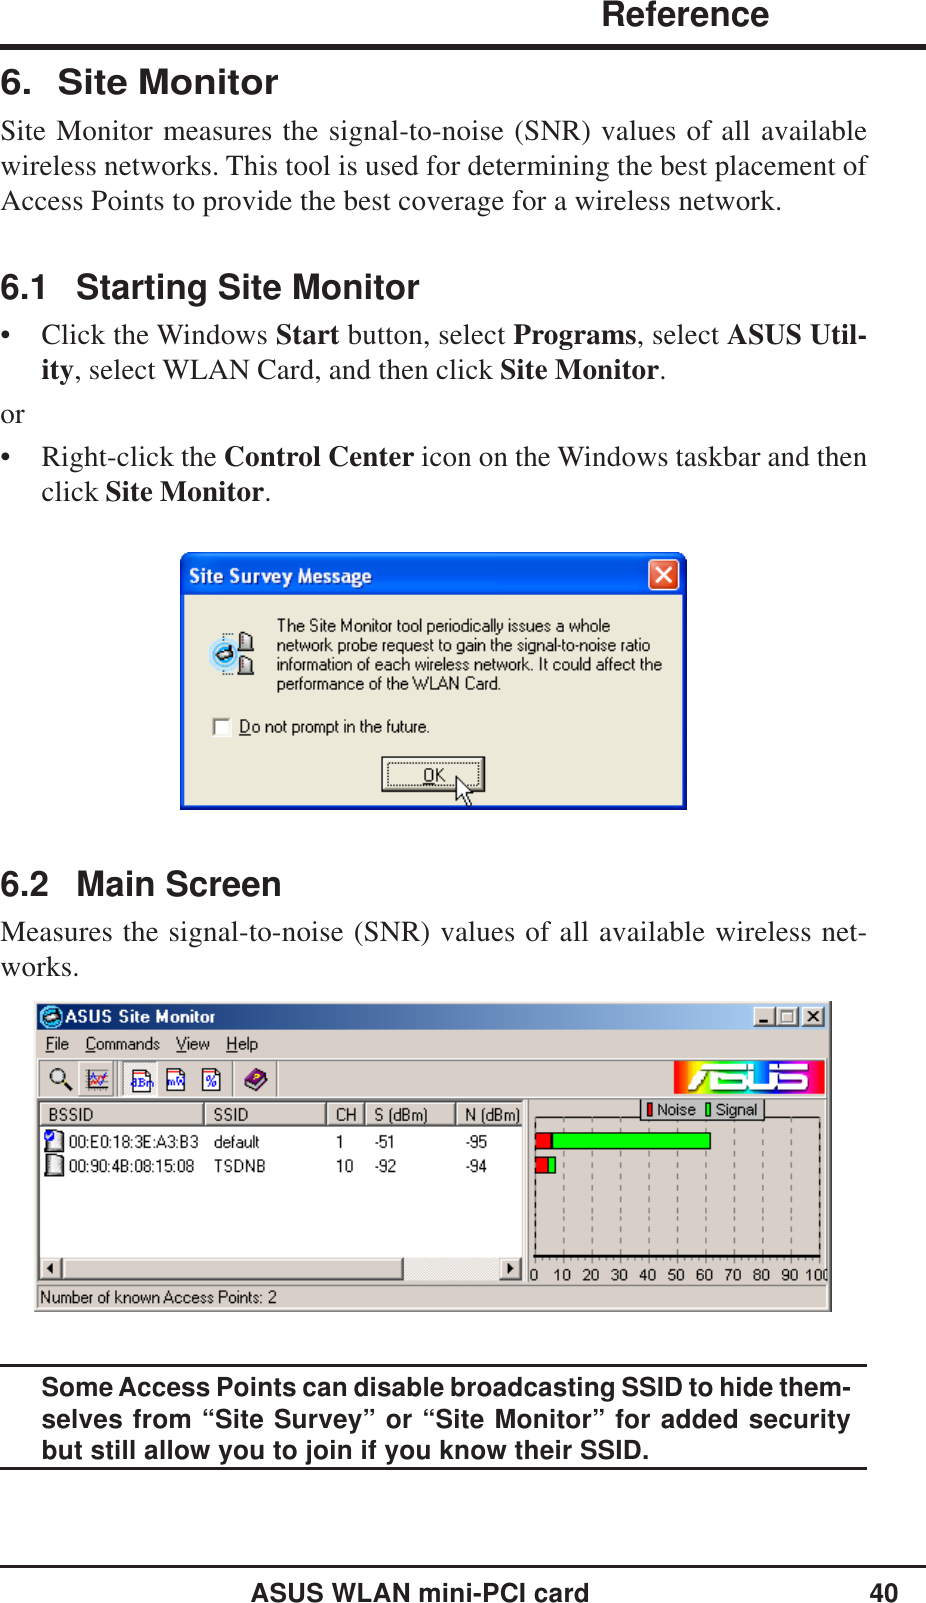 ASUS WLAN mini-PCI card 40              ReferenceChapter 36. Site MonitorSite Monitor measures the signal-to-noise (SNR) values of all availablewireless networks. This tool is used for determining the best placement ofAccess Points to provide the best coverage for a wireless network.6.1 Starting Site Monitor• Click the Windows Start button, select Programs, select ASUS Util-ity, select WLAN Card, and then click Site Monitor.or• Right-click the Control Center icon on the Windows taskbar and thenclick Site Monitor.6.2 Main ScreenMeasures the signal-to-noise (SNR) values of all available wireless net-works.Some Access Points can disable broadcasting SSID to hide them-selves from “Site Survey” or “Site Monitor” for added securitybut still allow you to join if you know their SSID.